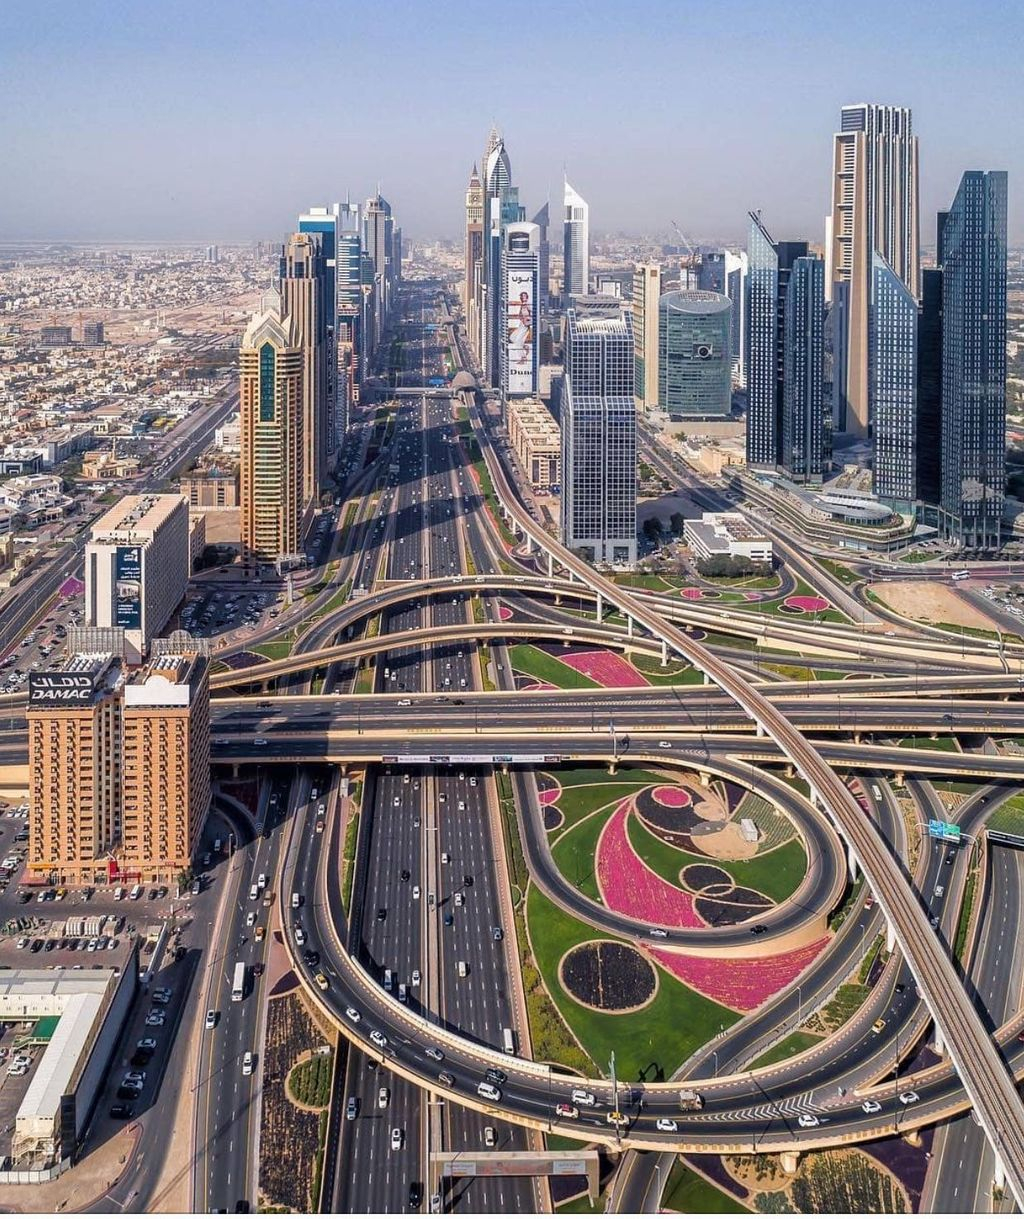 Awesome Photos Of Dubai To Make You Want To Visit It47